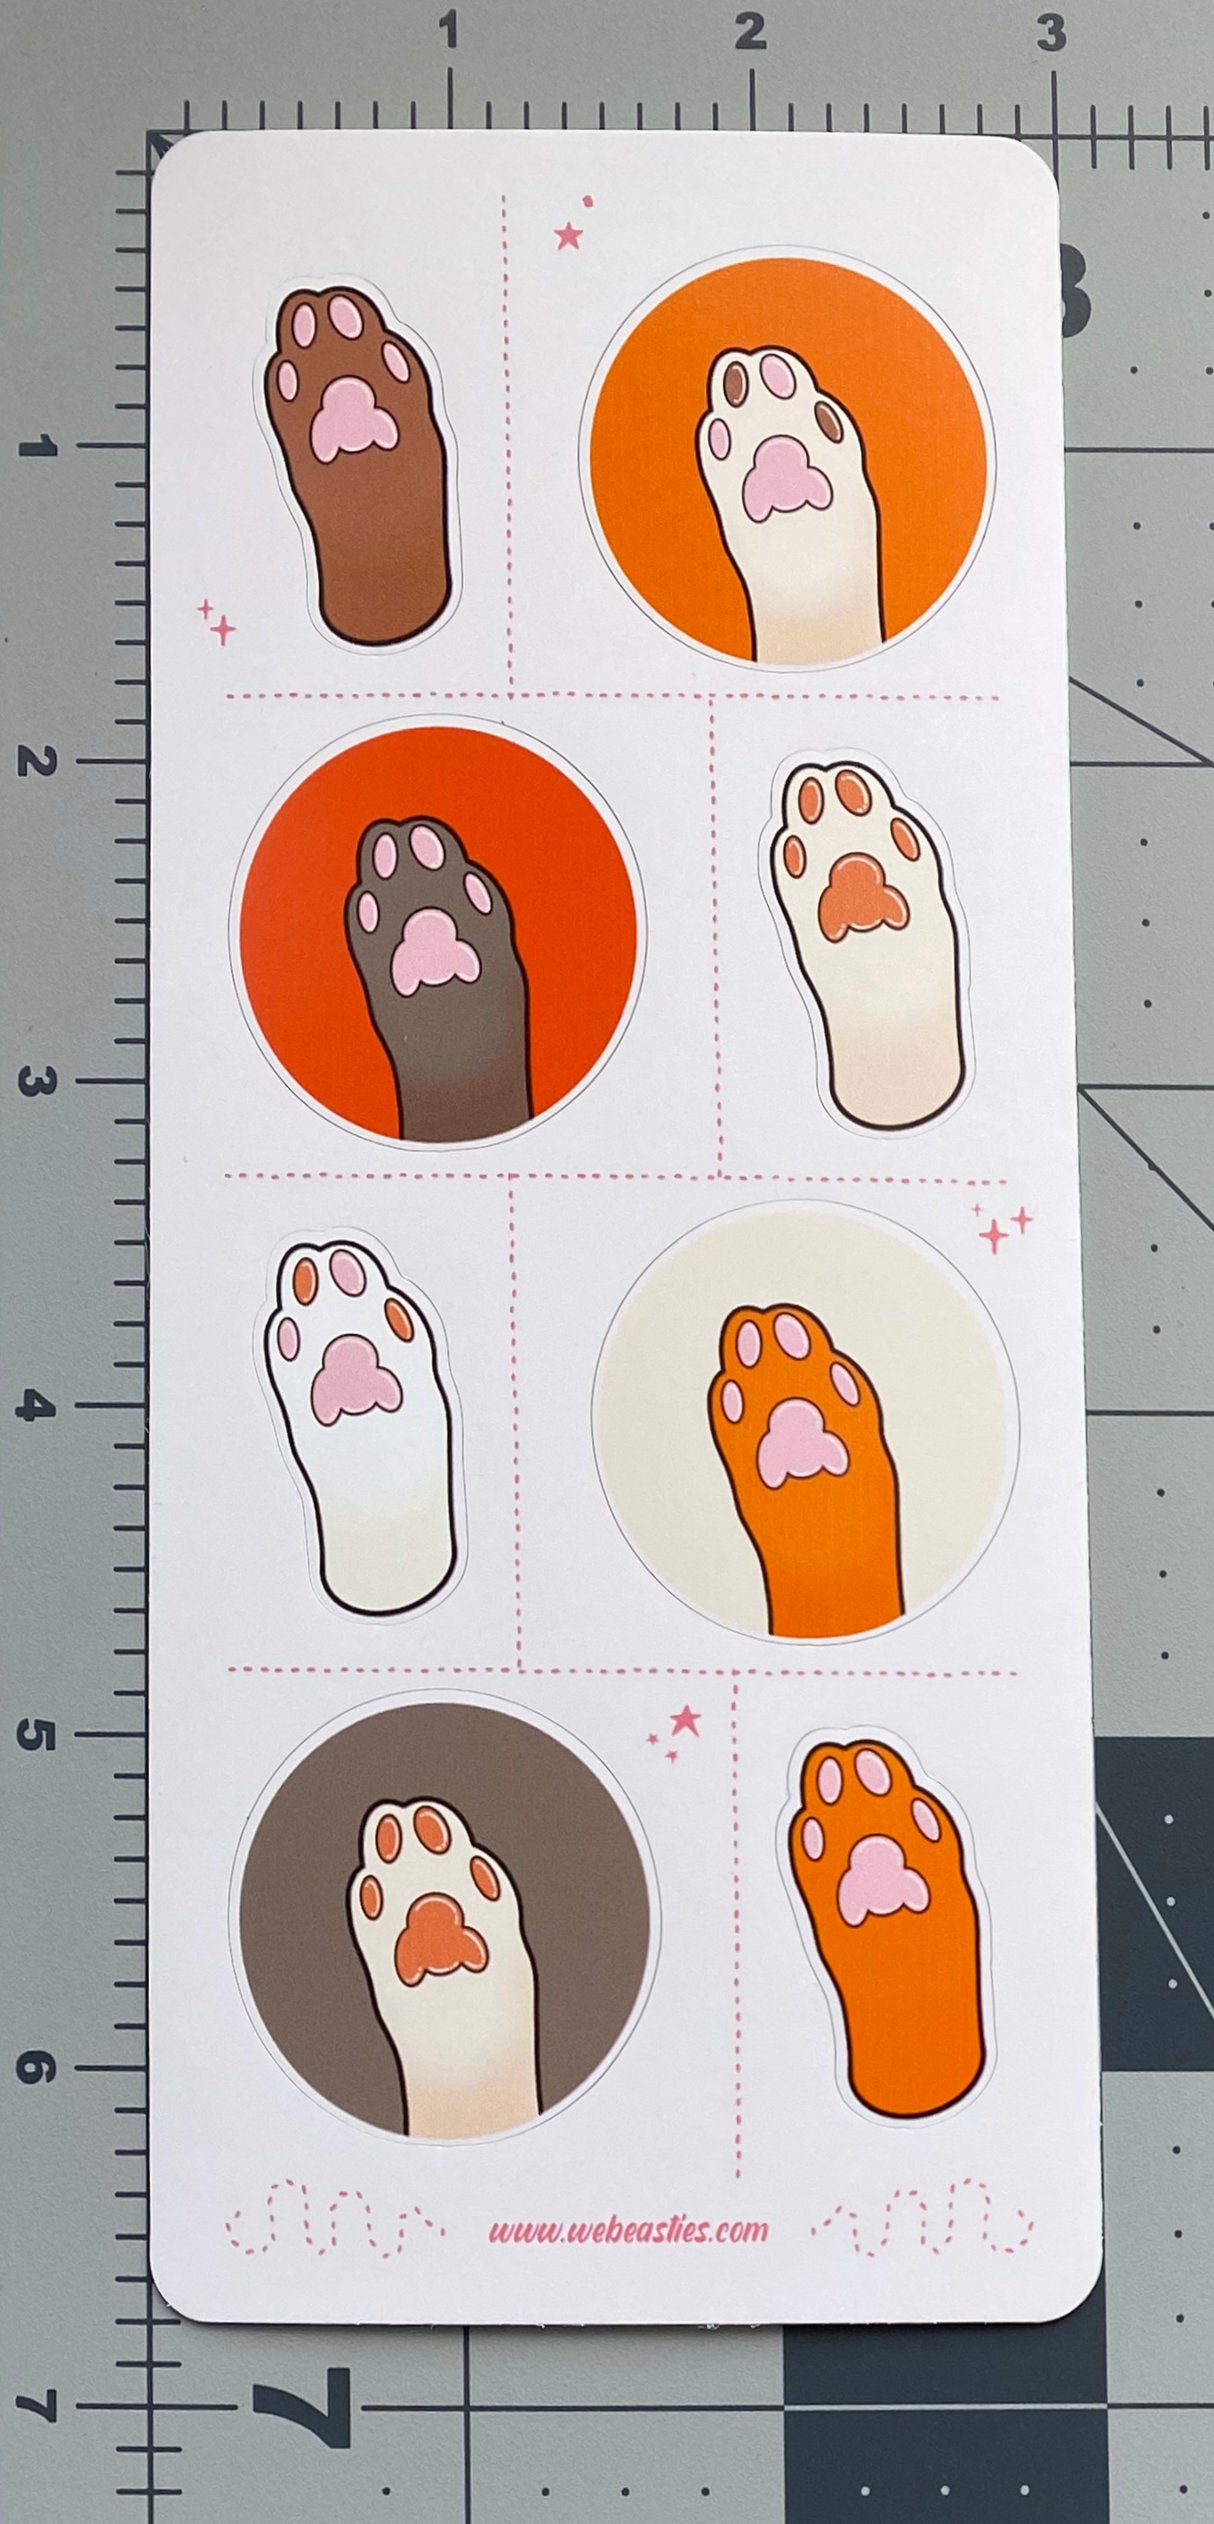 A sticker sheet featuring 8 illustrations of cat's paws and toe pads. The paws are light brown, dark brown, white, and off white. The toe pads are pink, brown, or both. Four paws sit against orange, dark orange, cream or light brown backgrounds and the others are an outline of the paw with no background. The sticker sheet sits against a ruled background to show size.